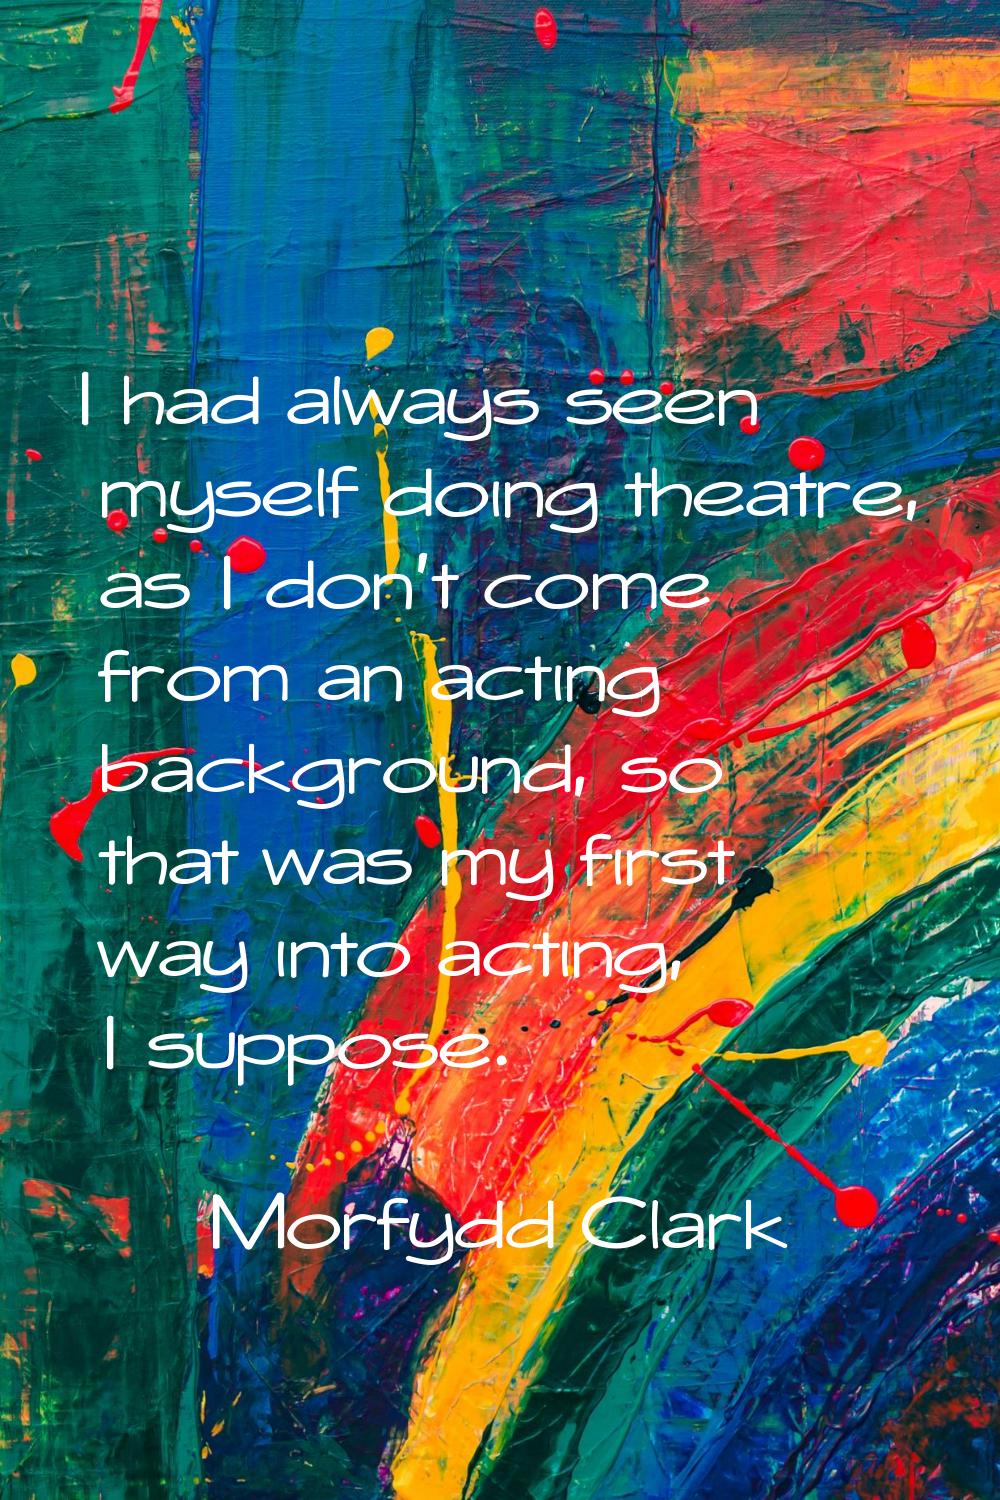 I had always seen myself doing theatre, as I don't come from an acting background, so that was my f